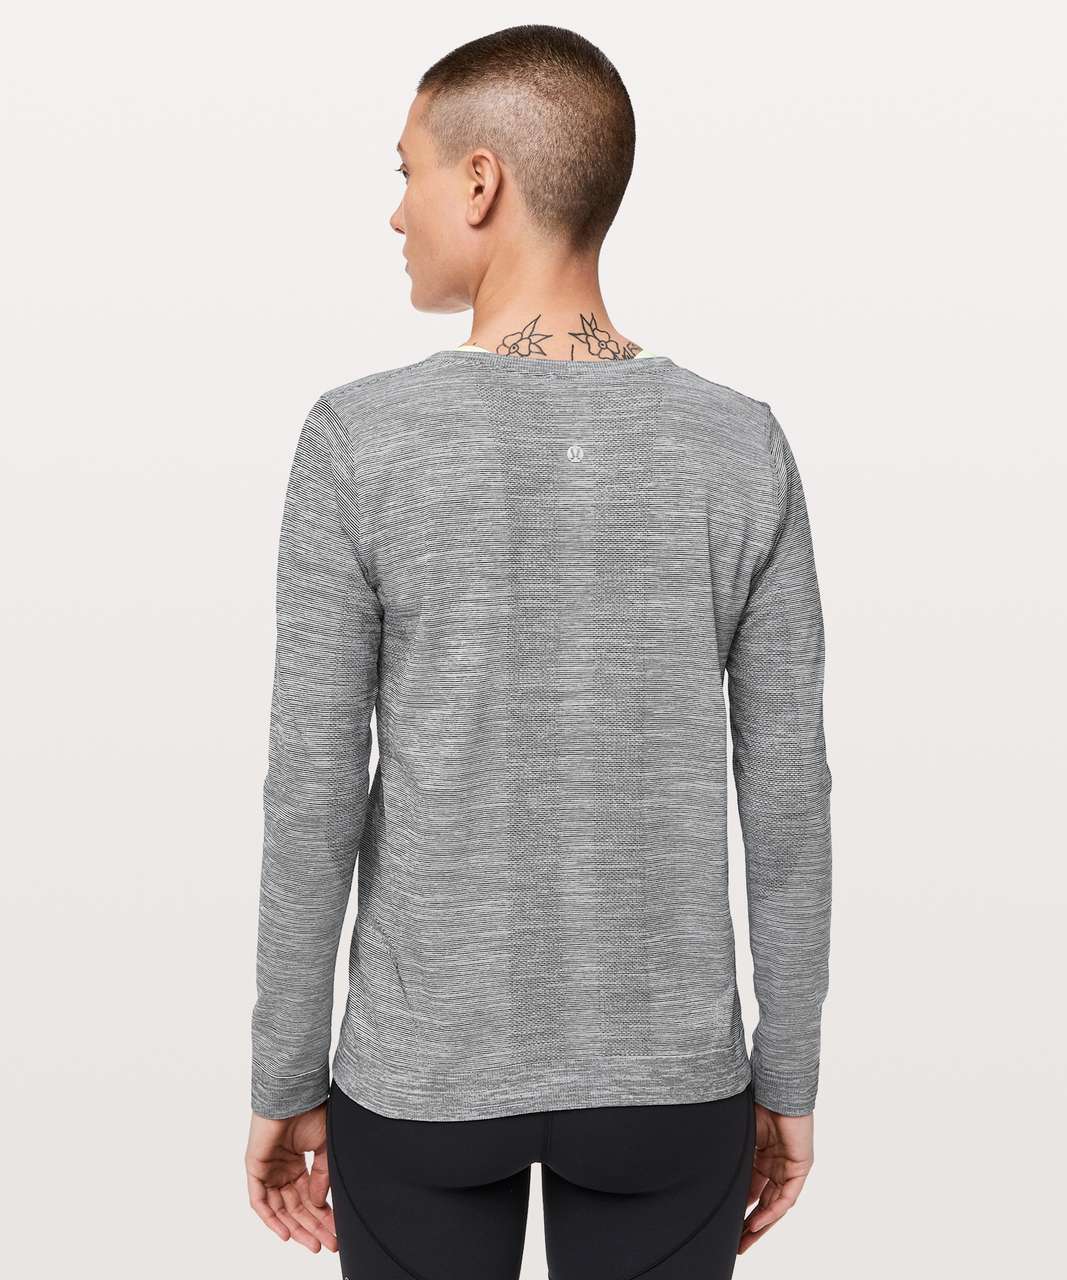 Lululemon Swiftly Tech Long Sleeve (Breeze) *Relaxed Fit - White / White / Black